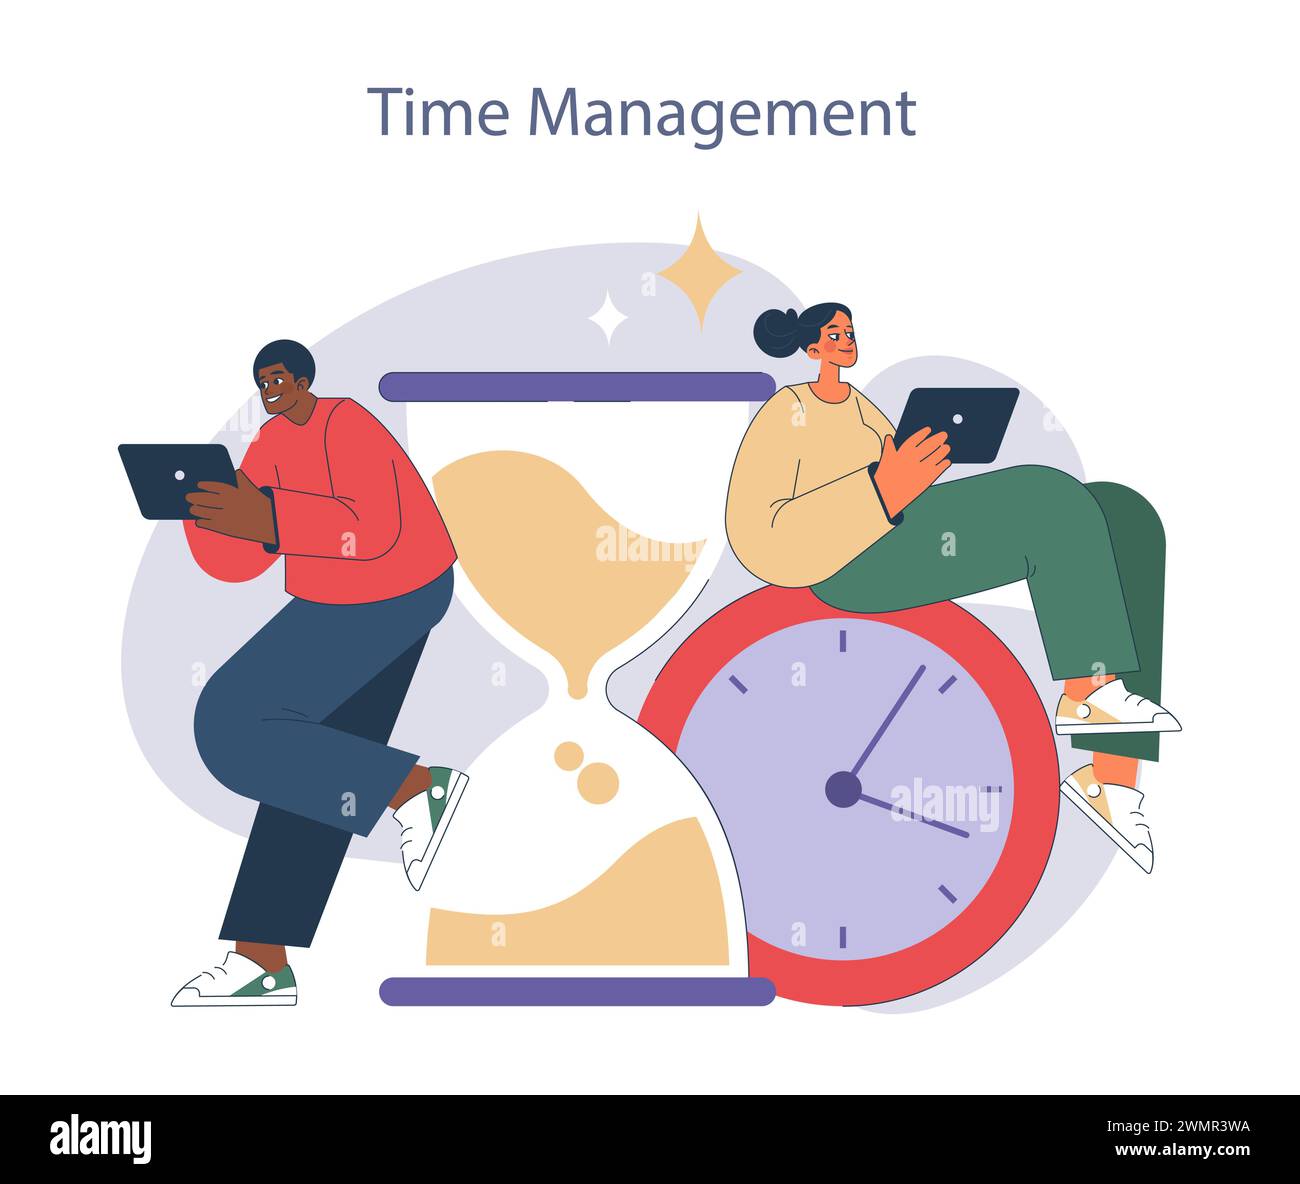 Time Management. Professionals optimizing productivity with digital tools, symbolic of efficient time management. Stock Vector